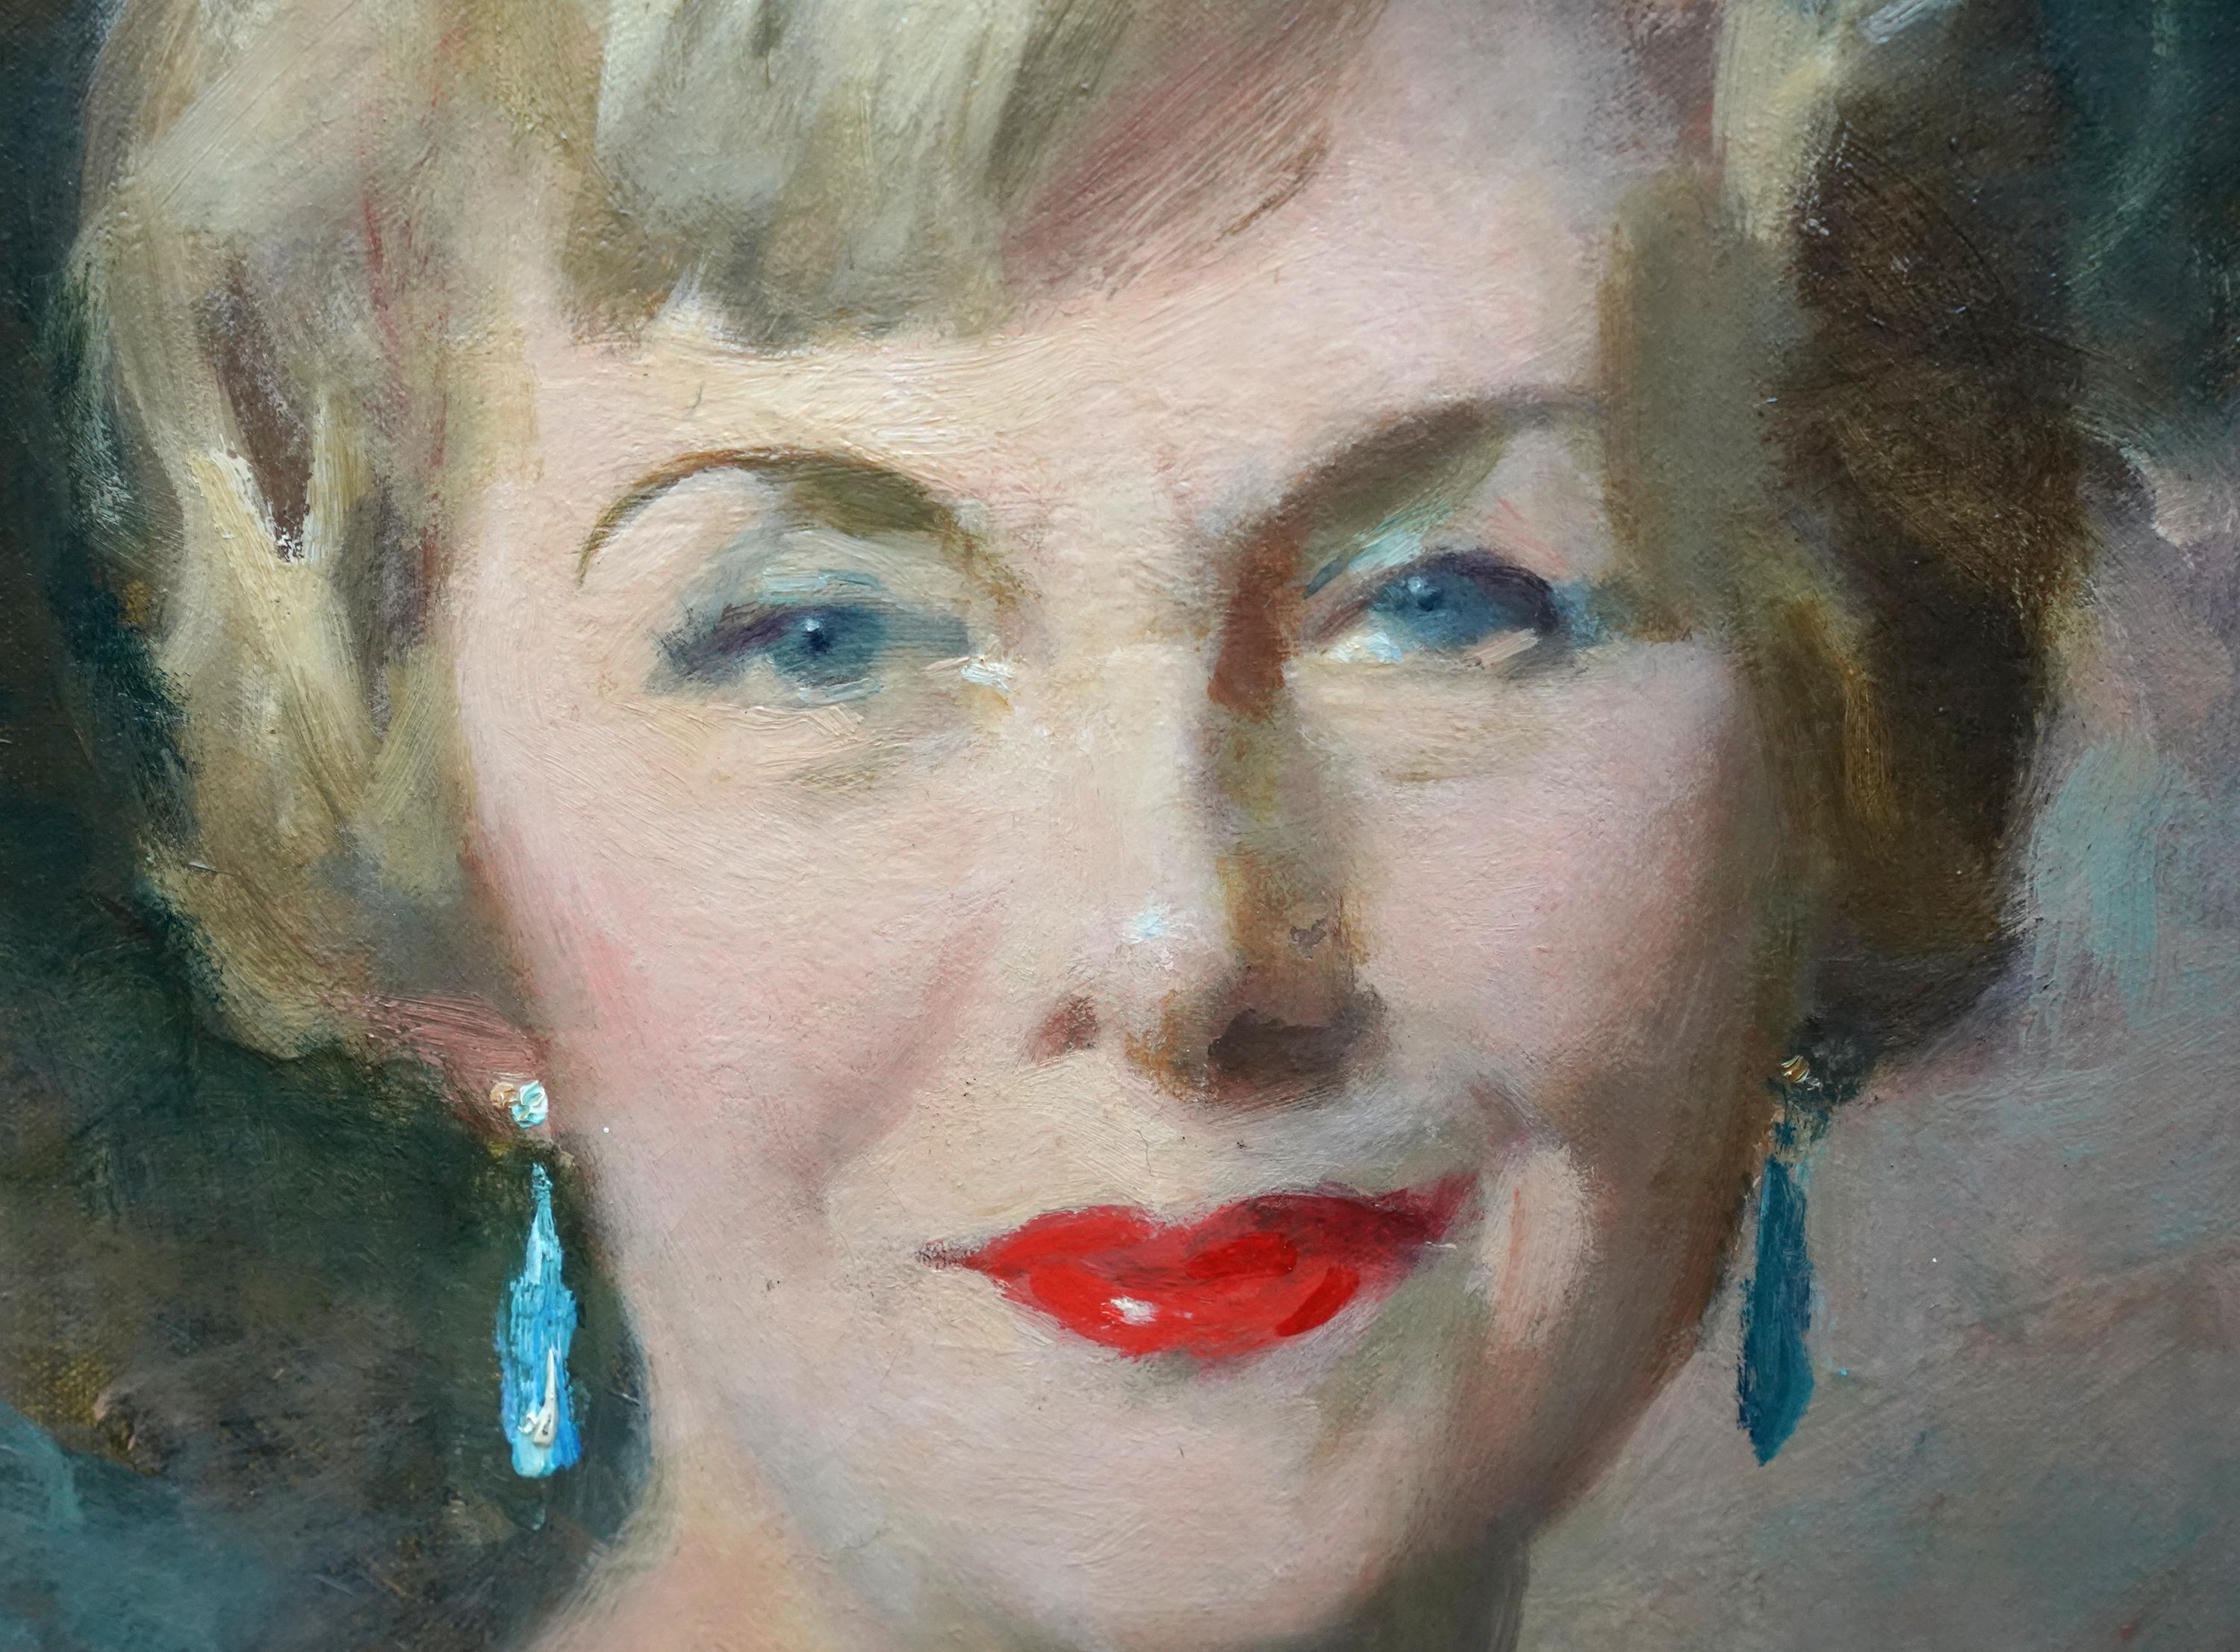 This superb British portrait oil painting is by noted Scottish artist David Cowan Dobson, better known as Cowan Dobson. Painted circa 1950 it is a bust length oil painting of a sophisticated and stylish blonde lady. She is wearing an off the